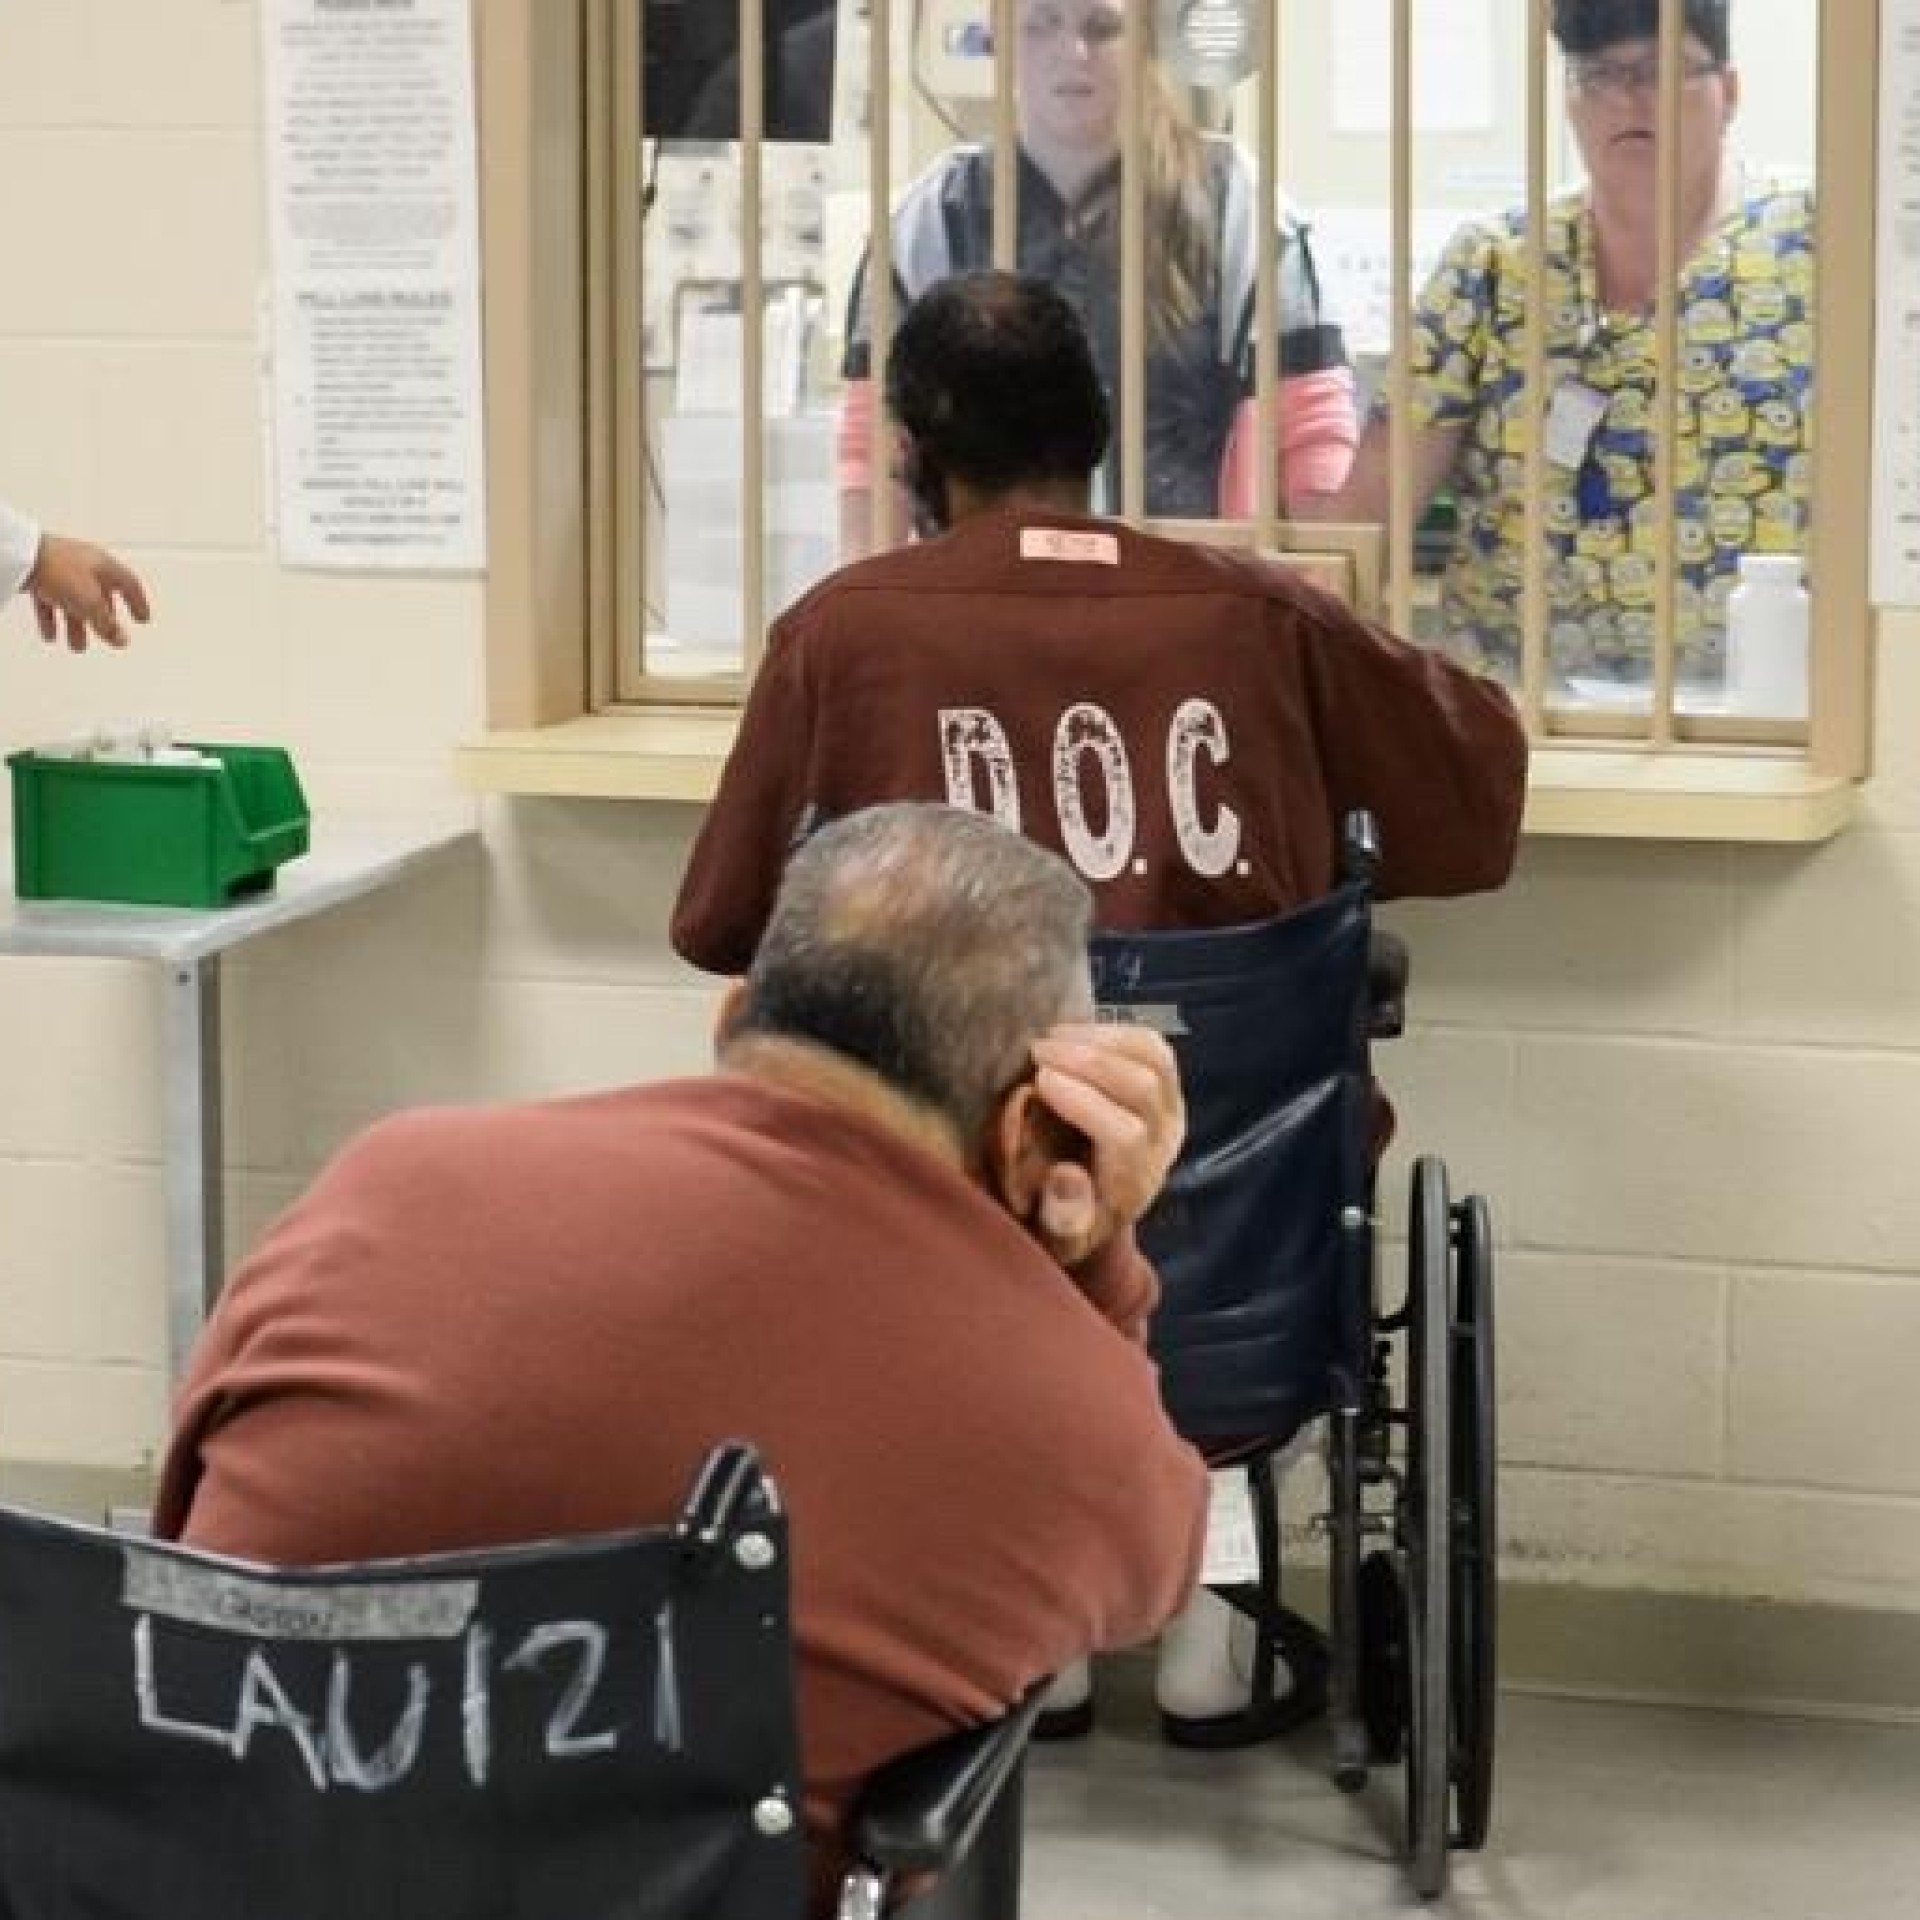 Two incarcerated men in wheel chairs and brown prison clothes wait in a medication line while a man in brown prison pants and a white shirt stands next to them